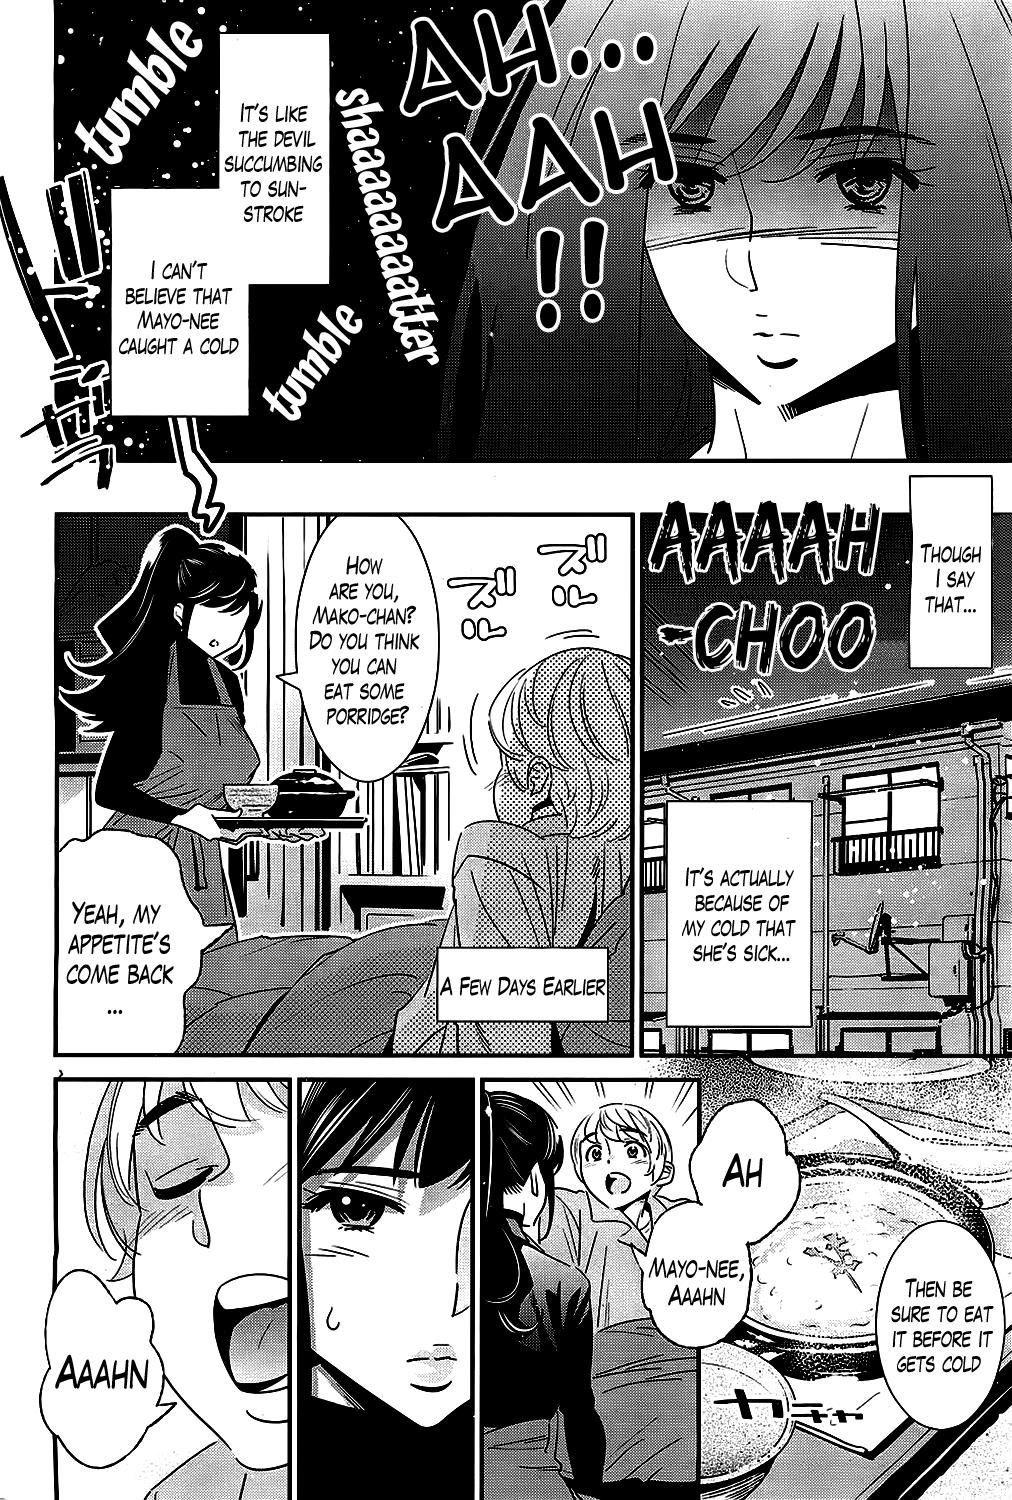 Boku no Haigorei? | The Ghost Behind My Back? Ch.3 - Lovesick Winter 2